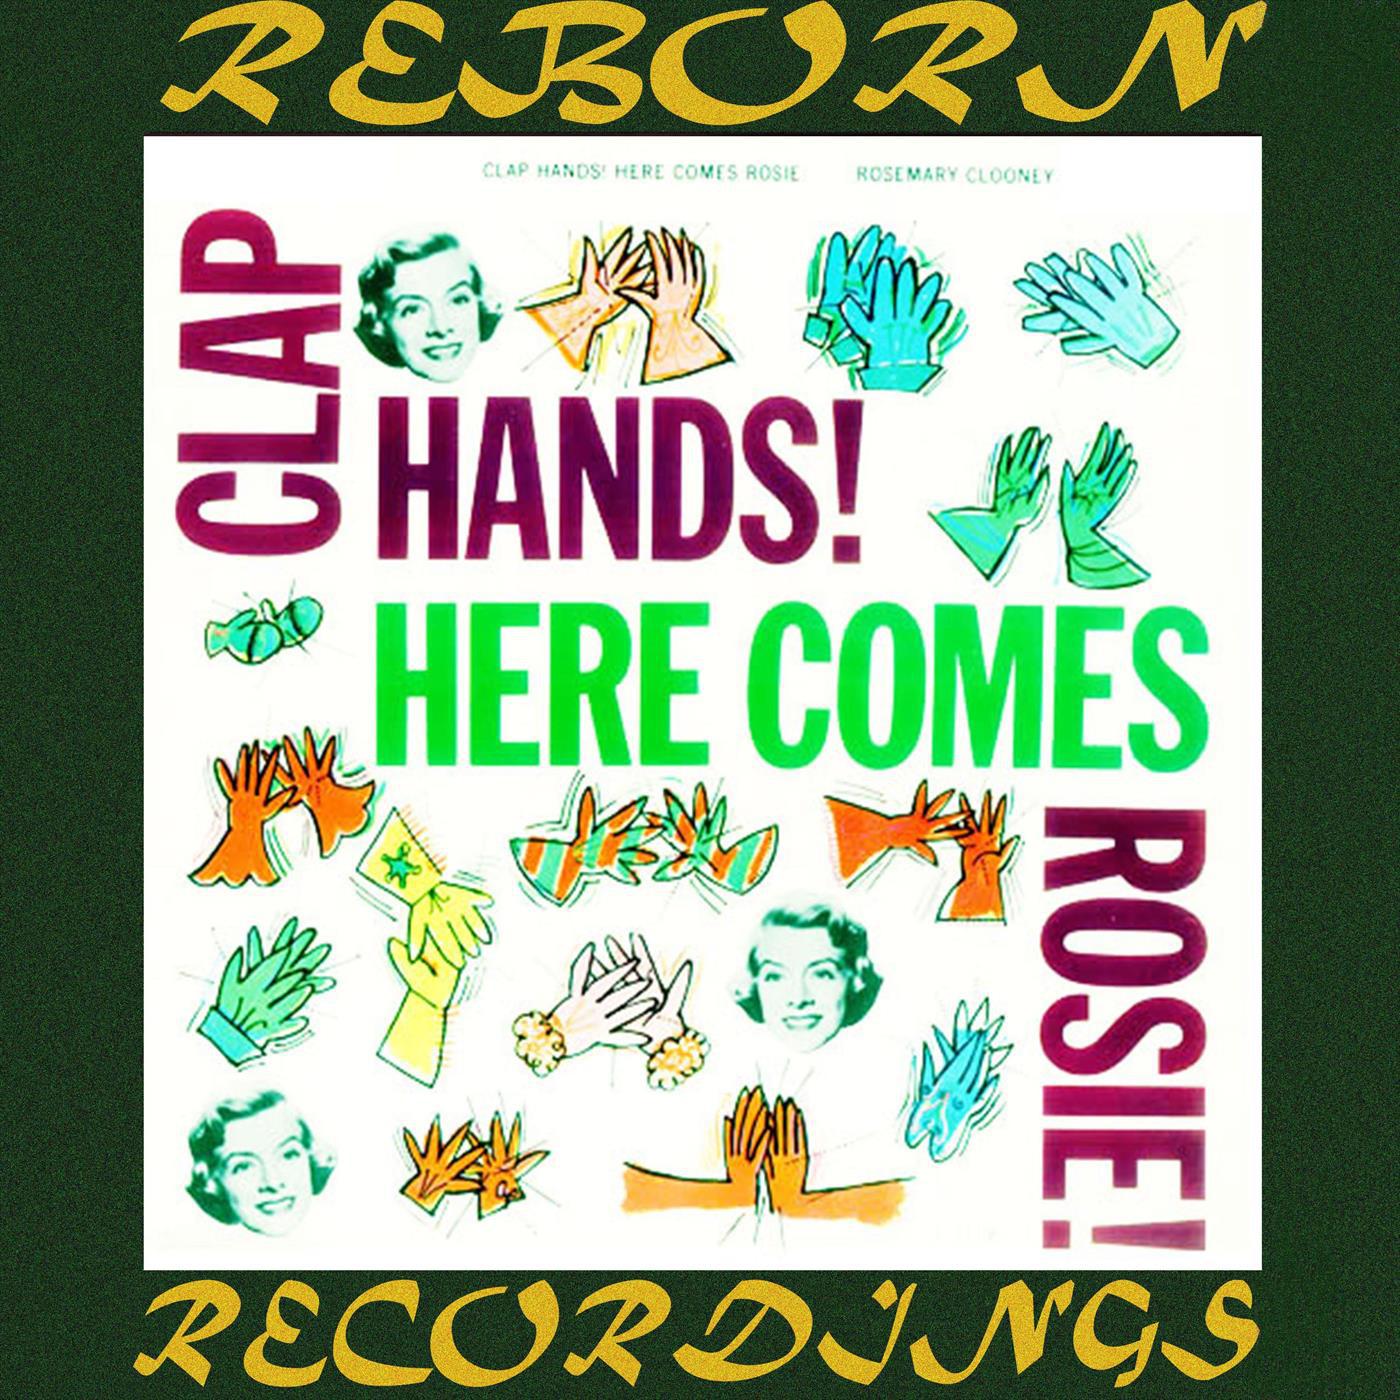 Clap Hands! Here Comes Rosie (RCA Female Vocal, HD Remastered)